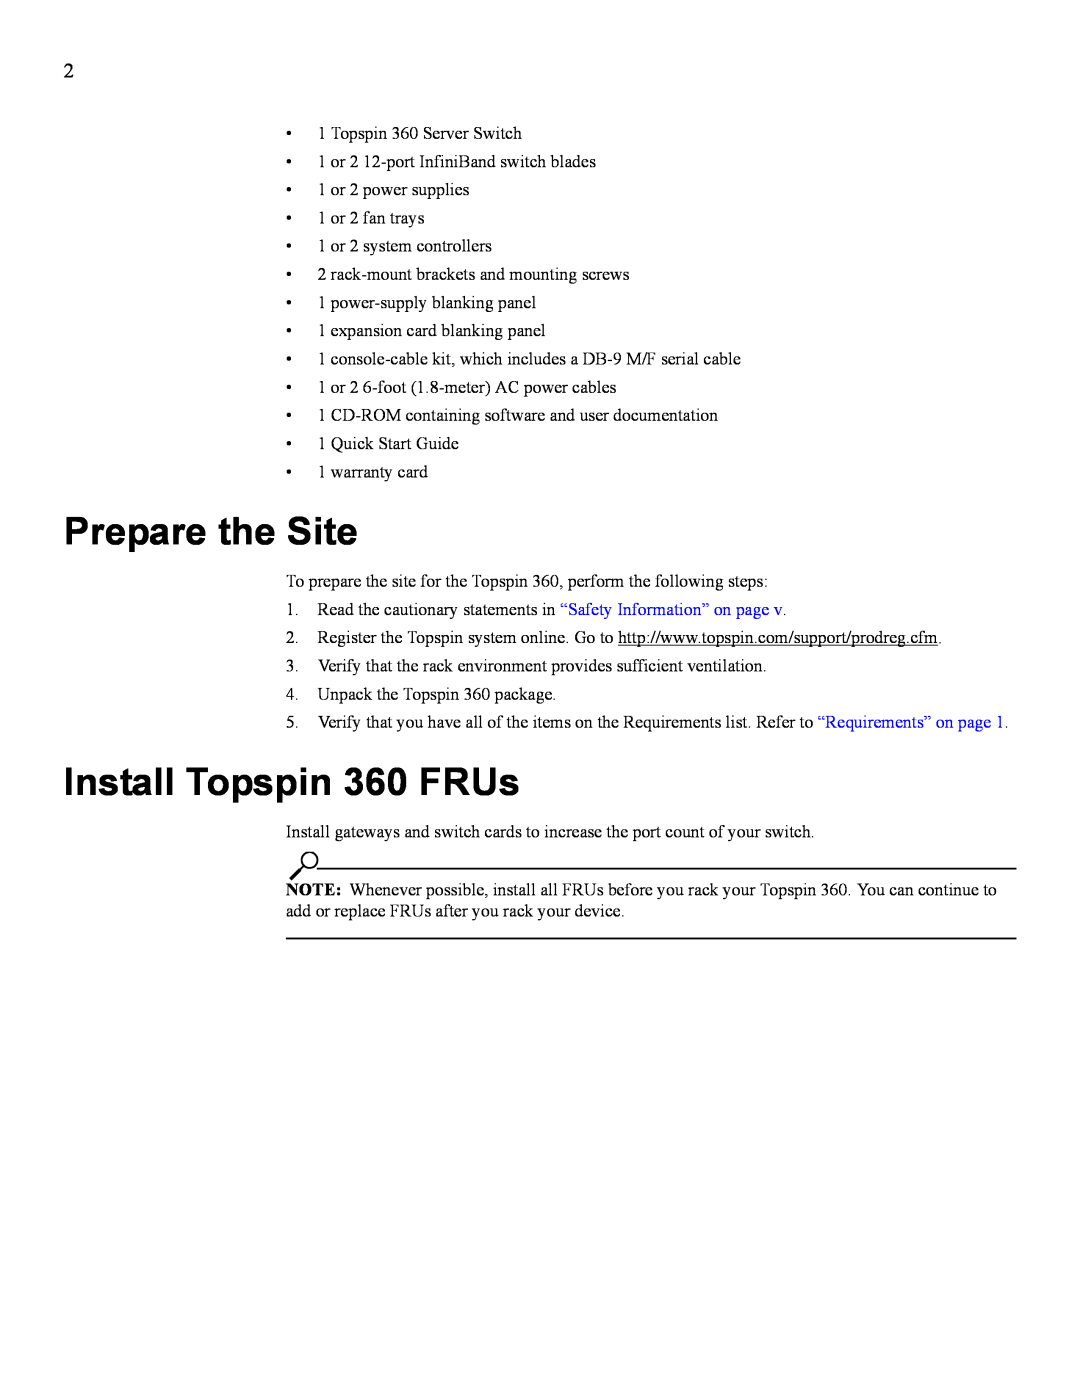 Cisco Systems SFS 3012 quick start Prepare the Site, Install Topspin 360 FRUs 